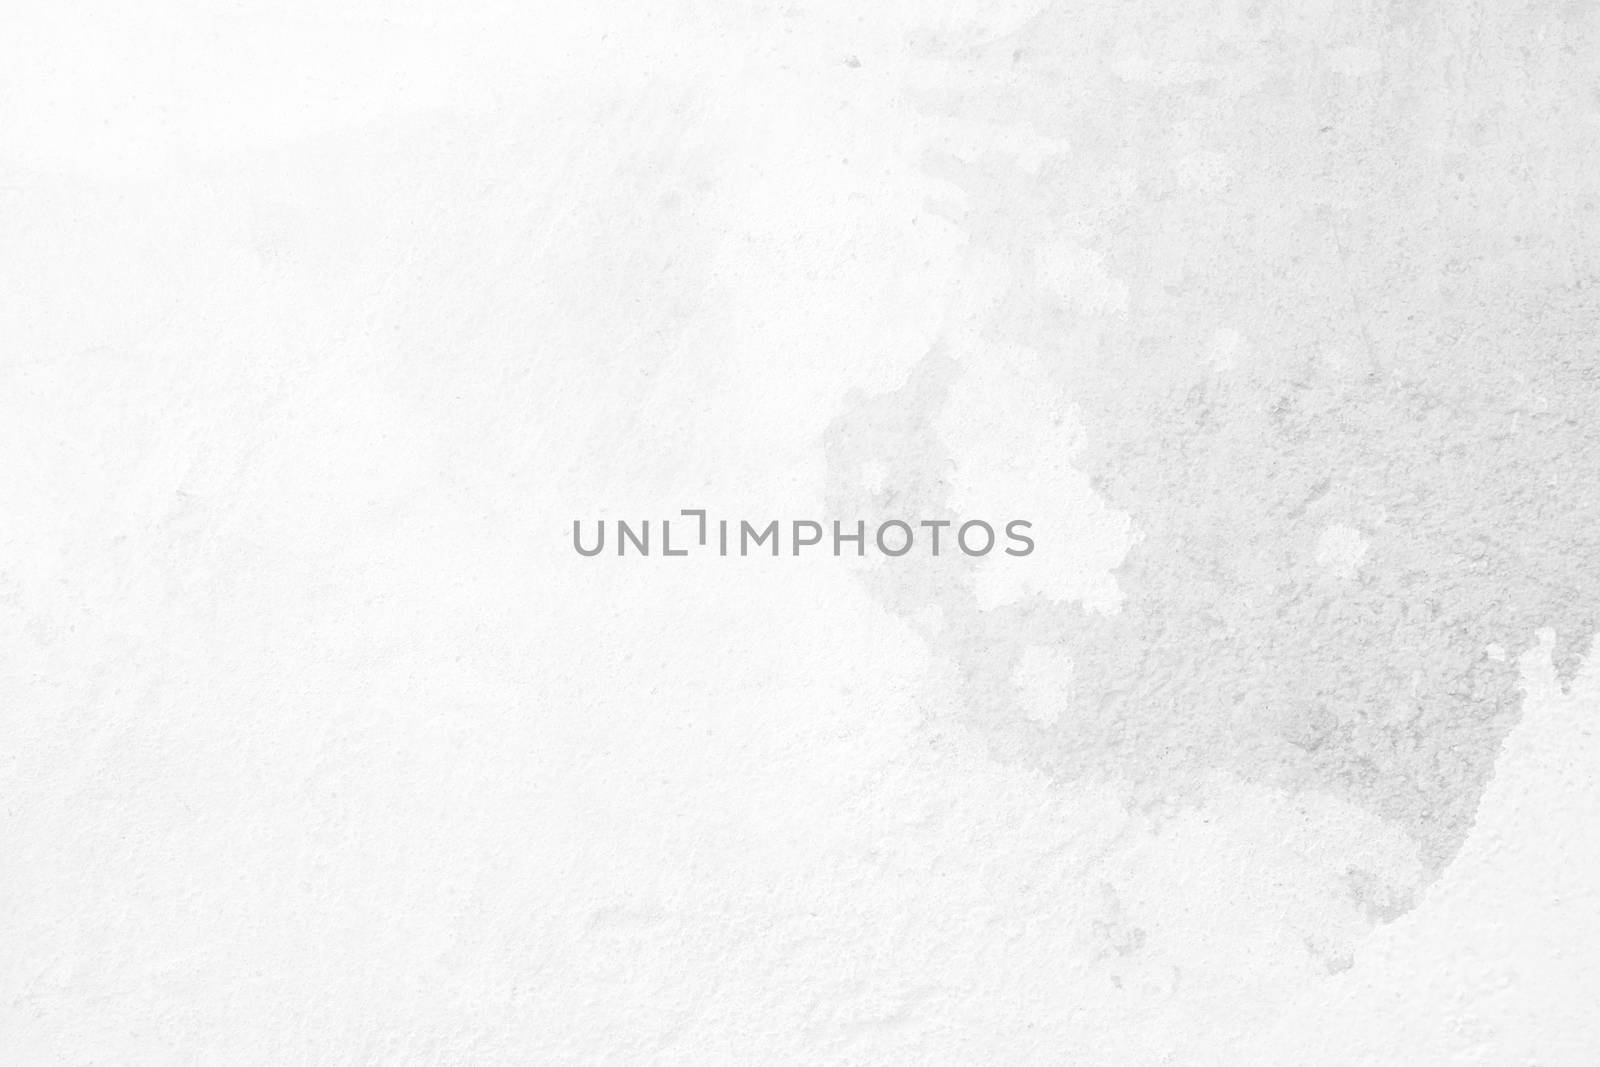 Unfinished White Painting on Concrete Wall Texture Background. by mesamong